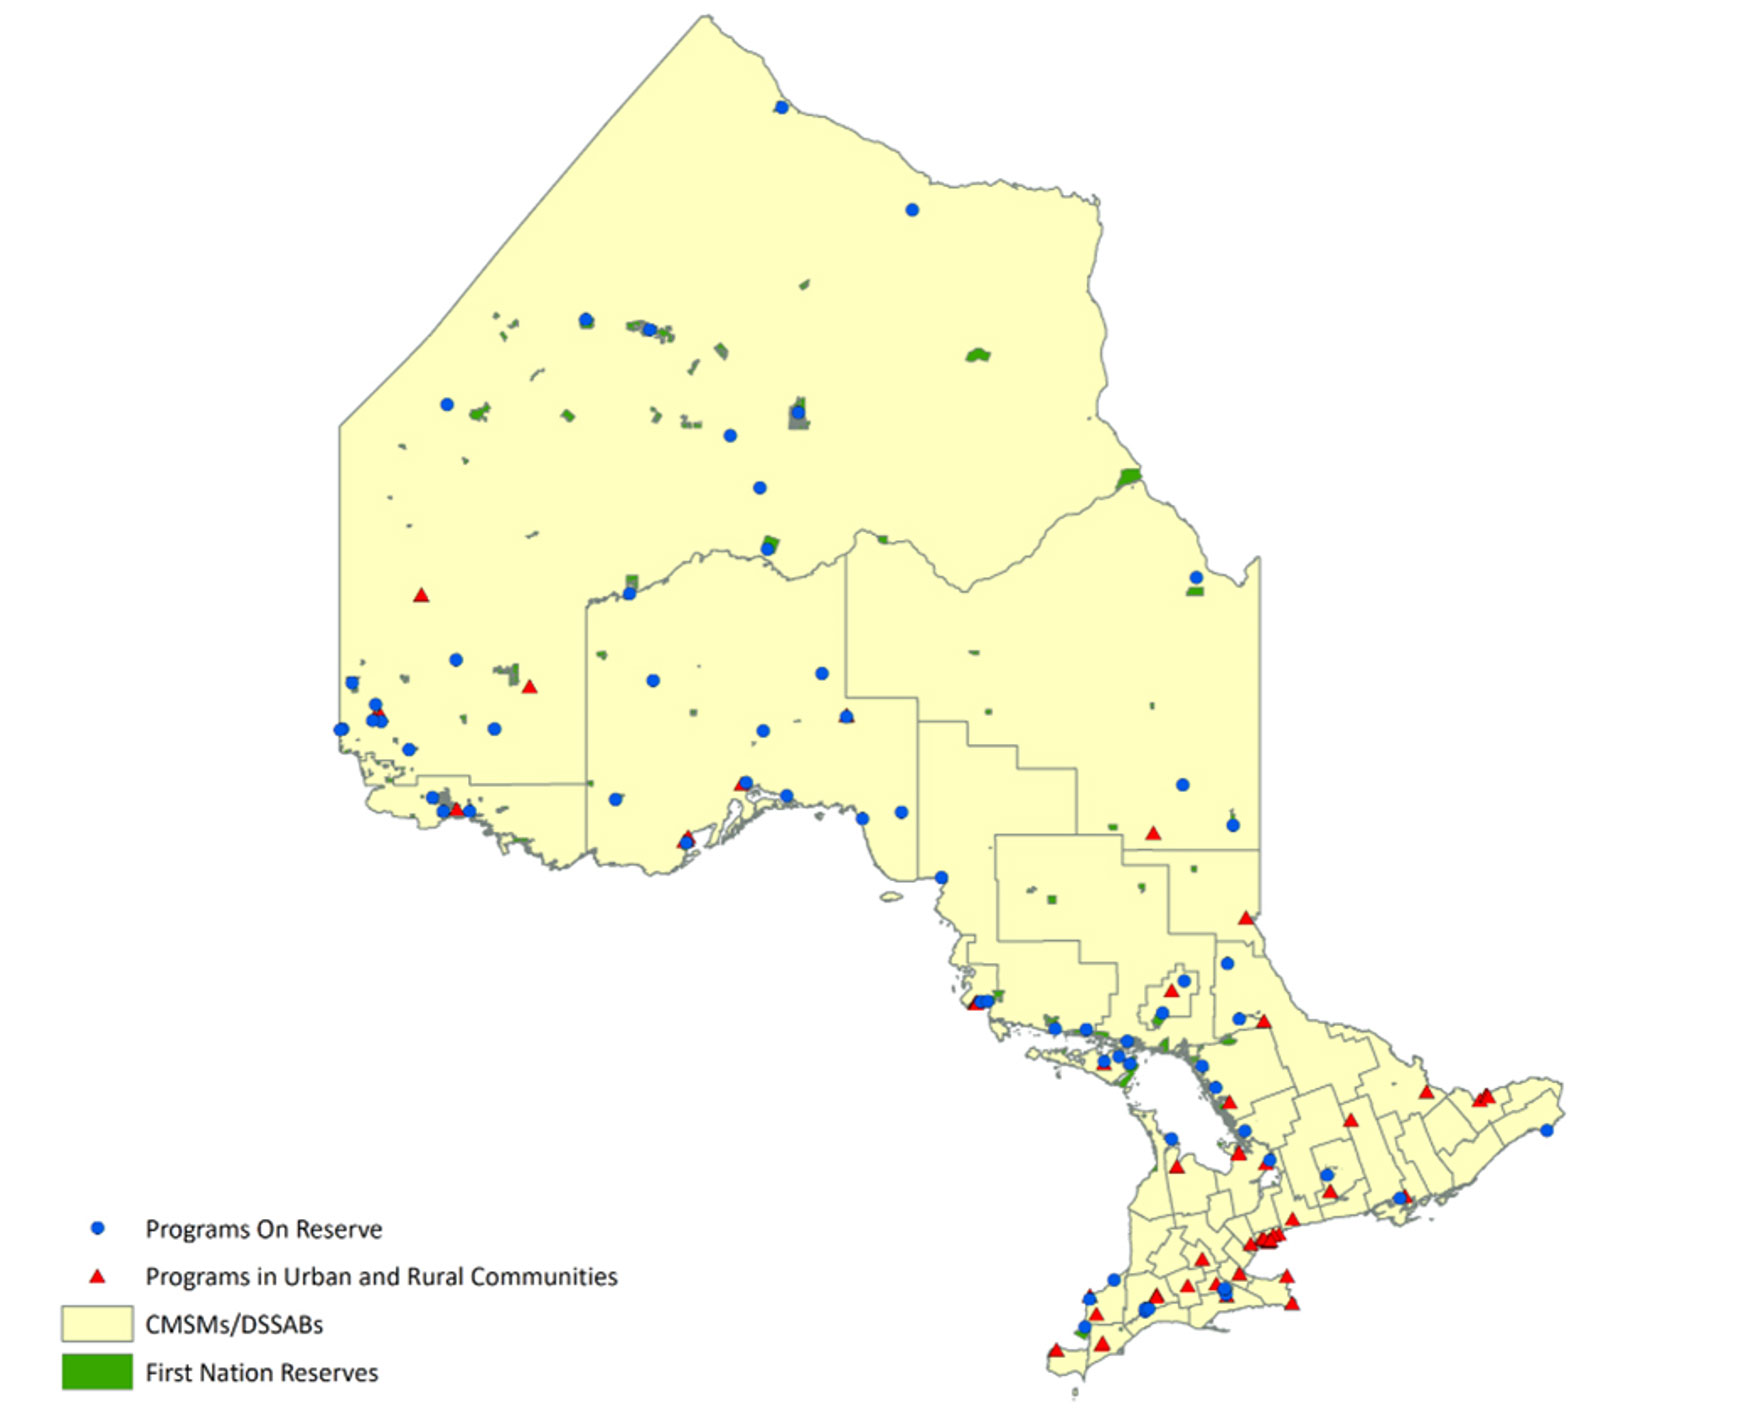 Map of Ontario showing the locations of Indigenous-led child care and child and family programs